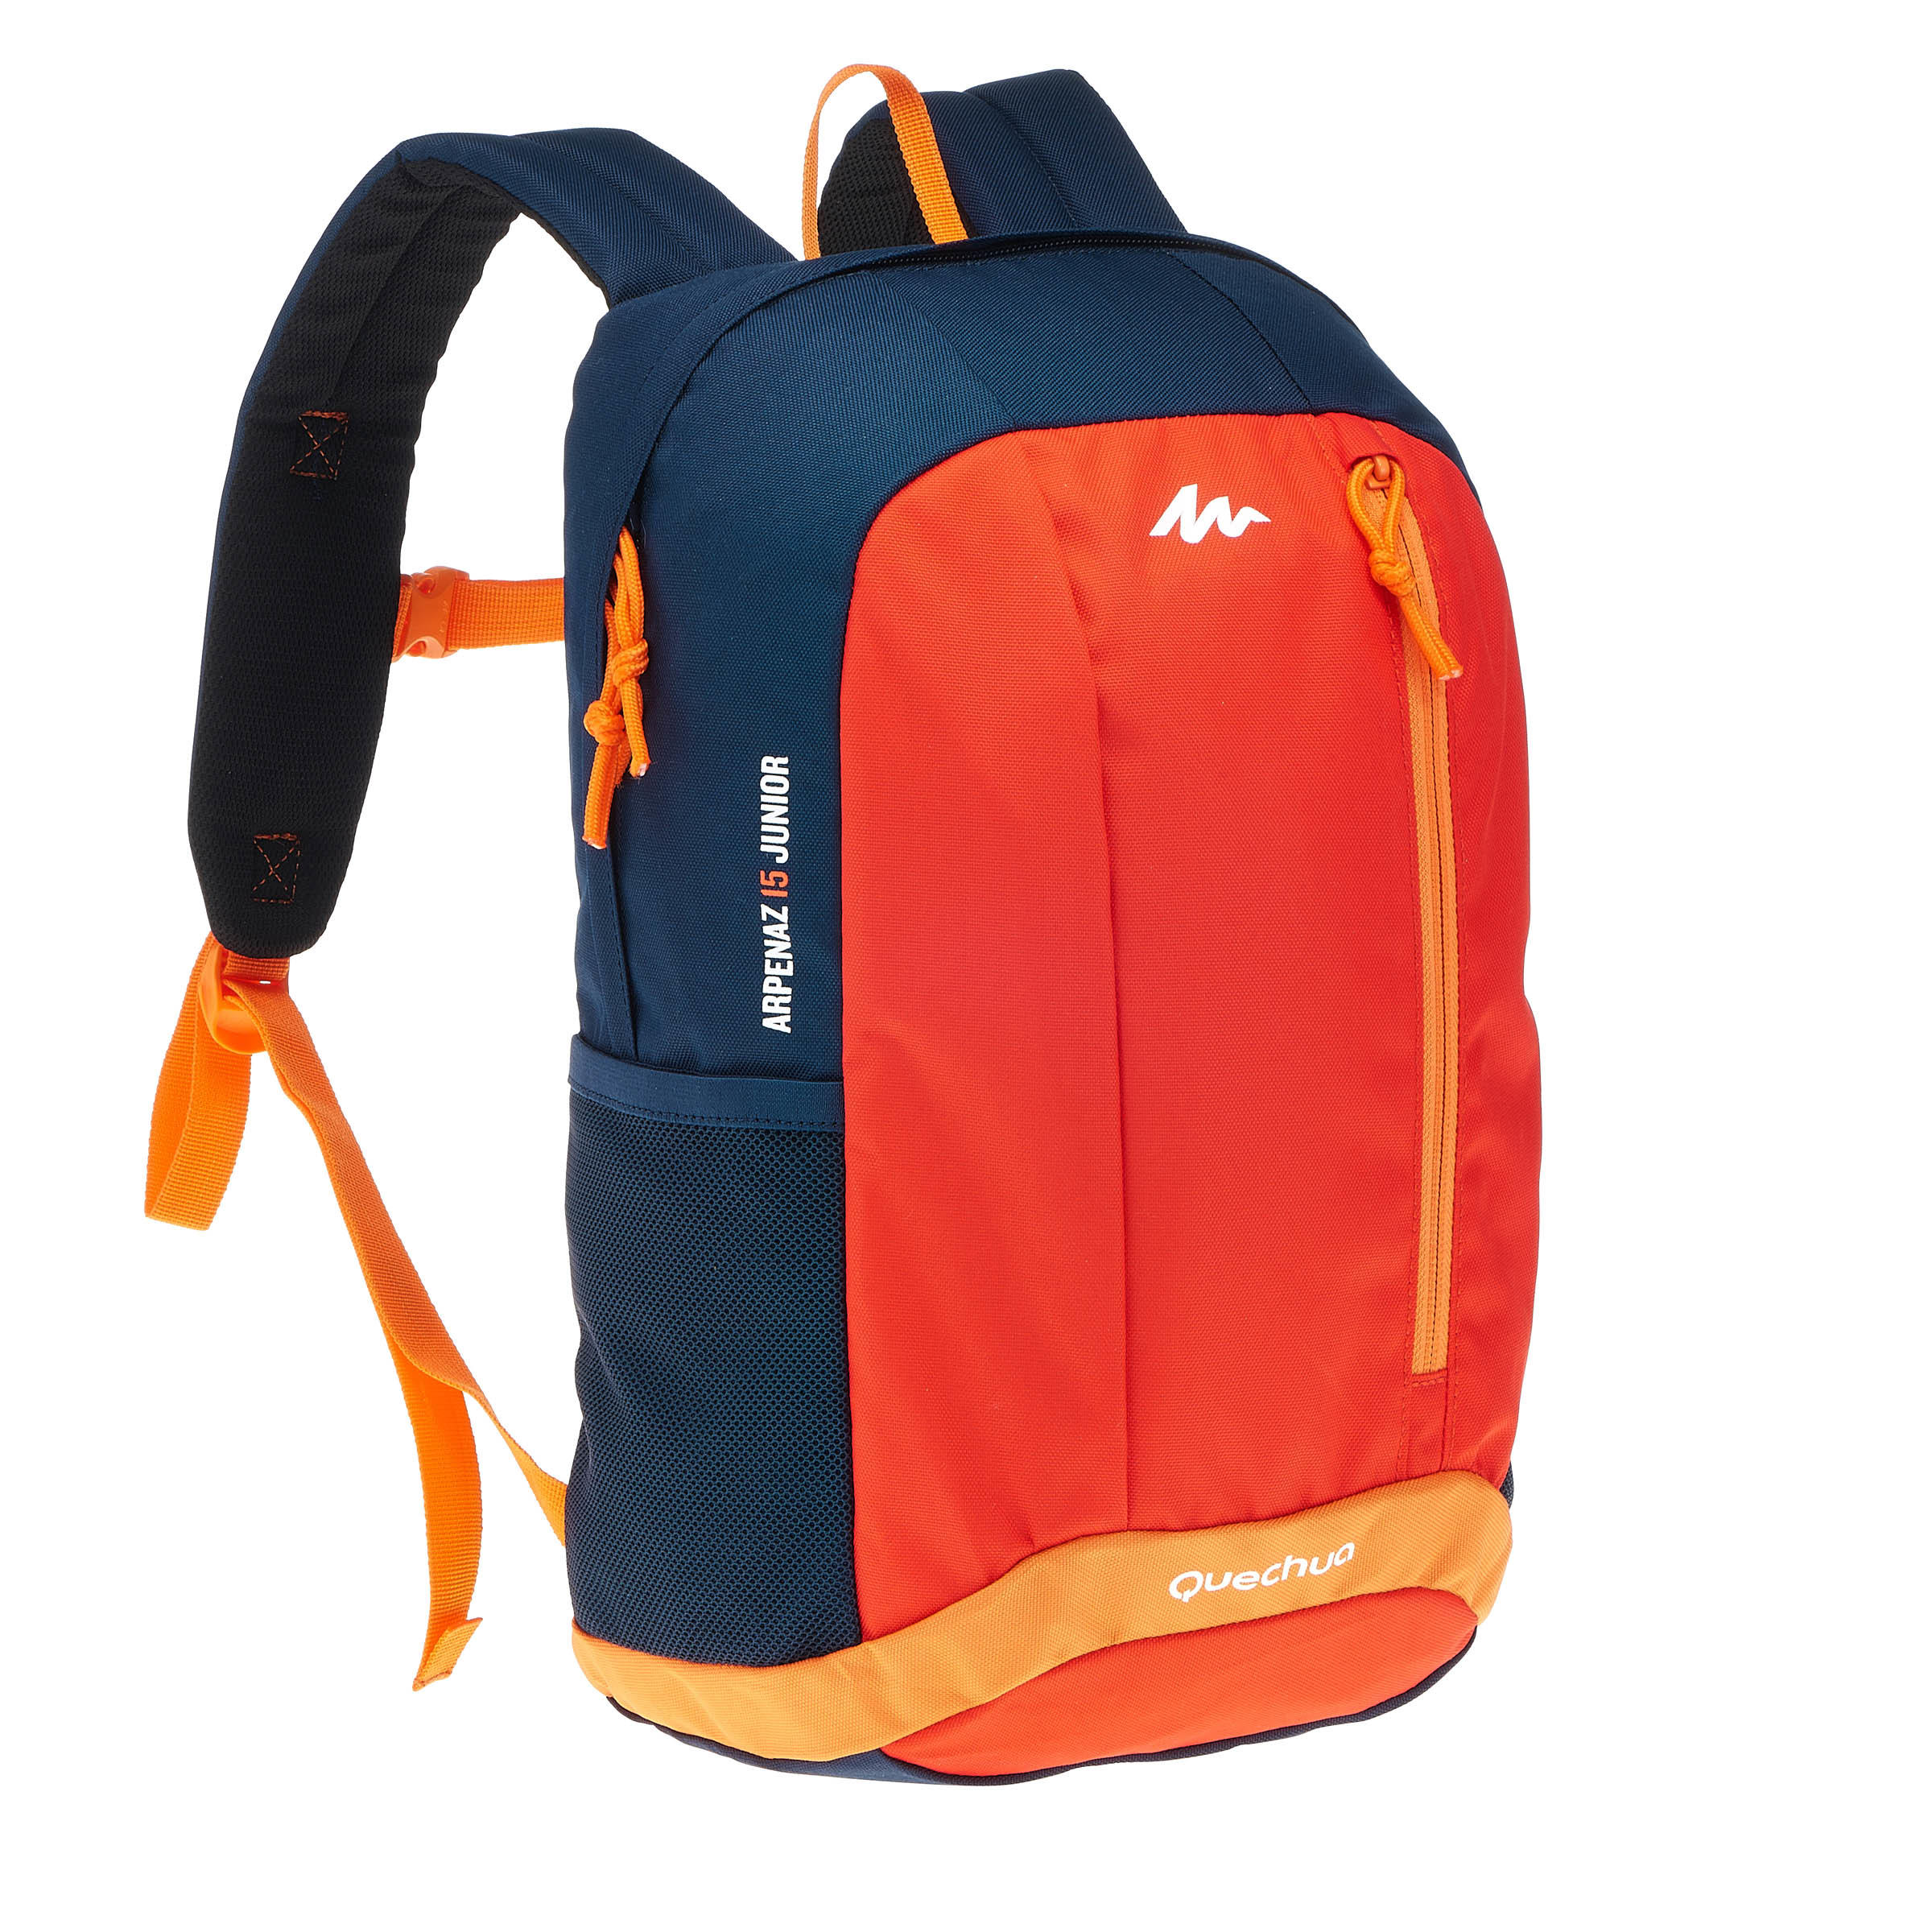 Kids Hiking Backpack MH500 15 Litres - Red 1/15